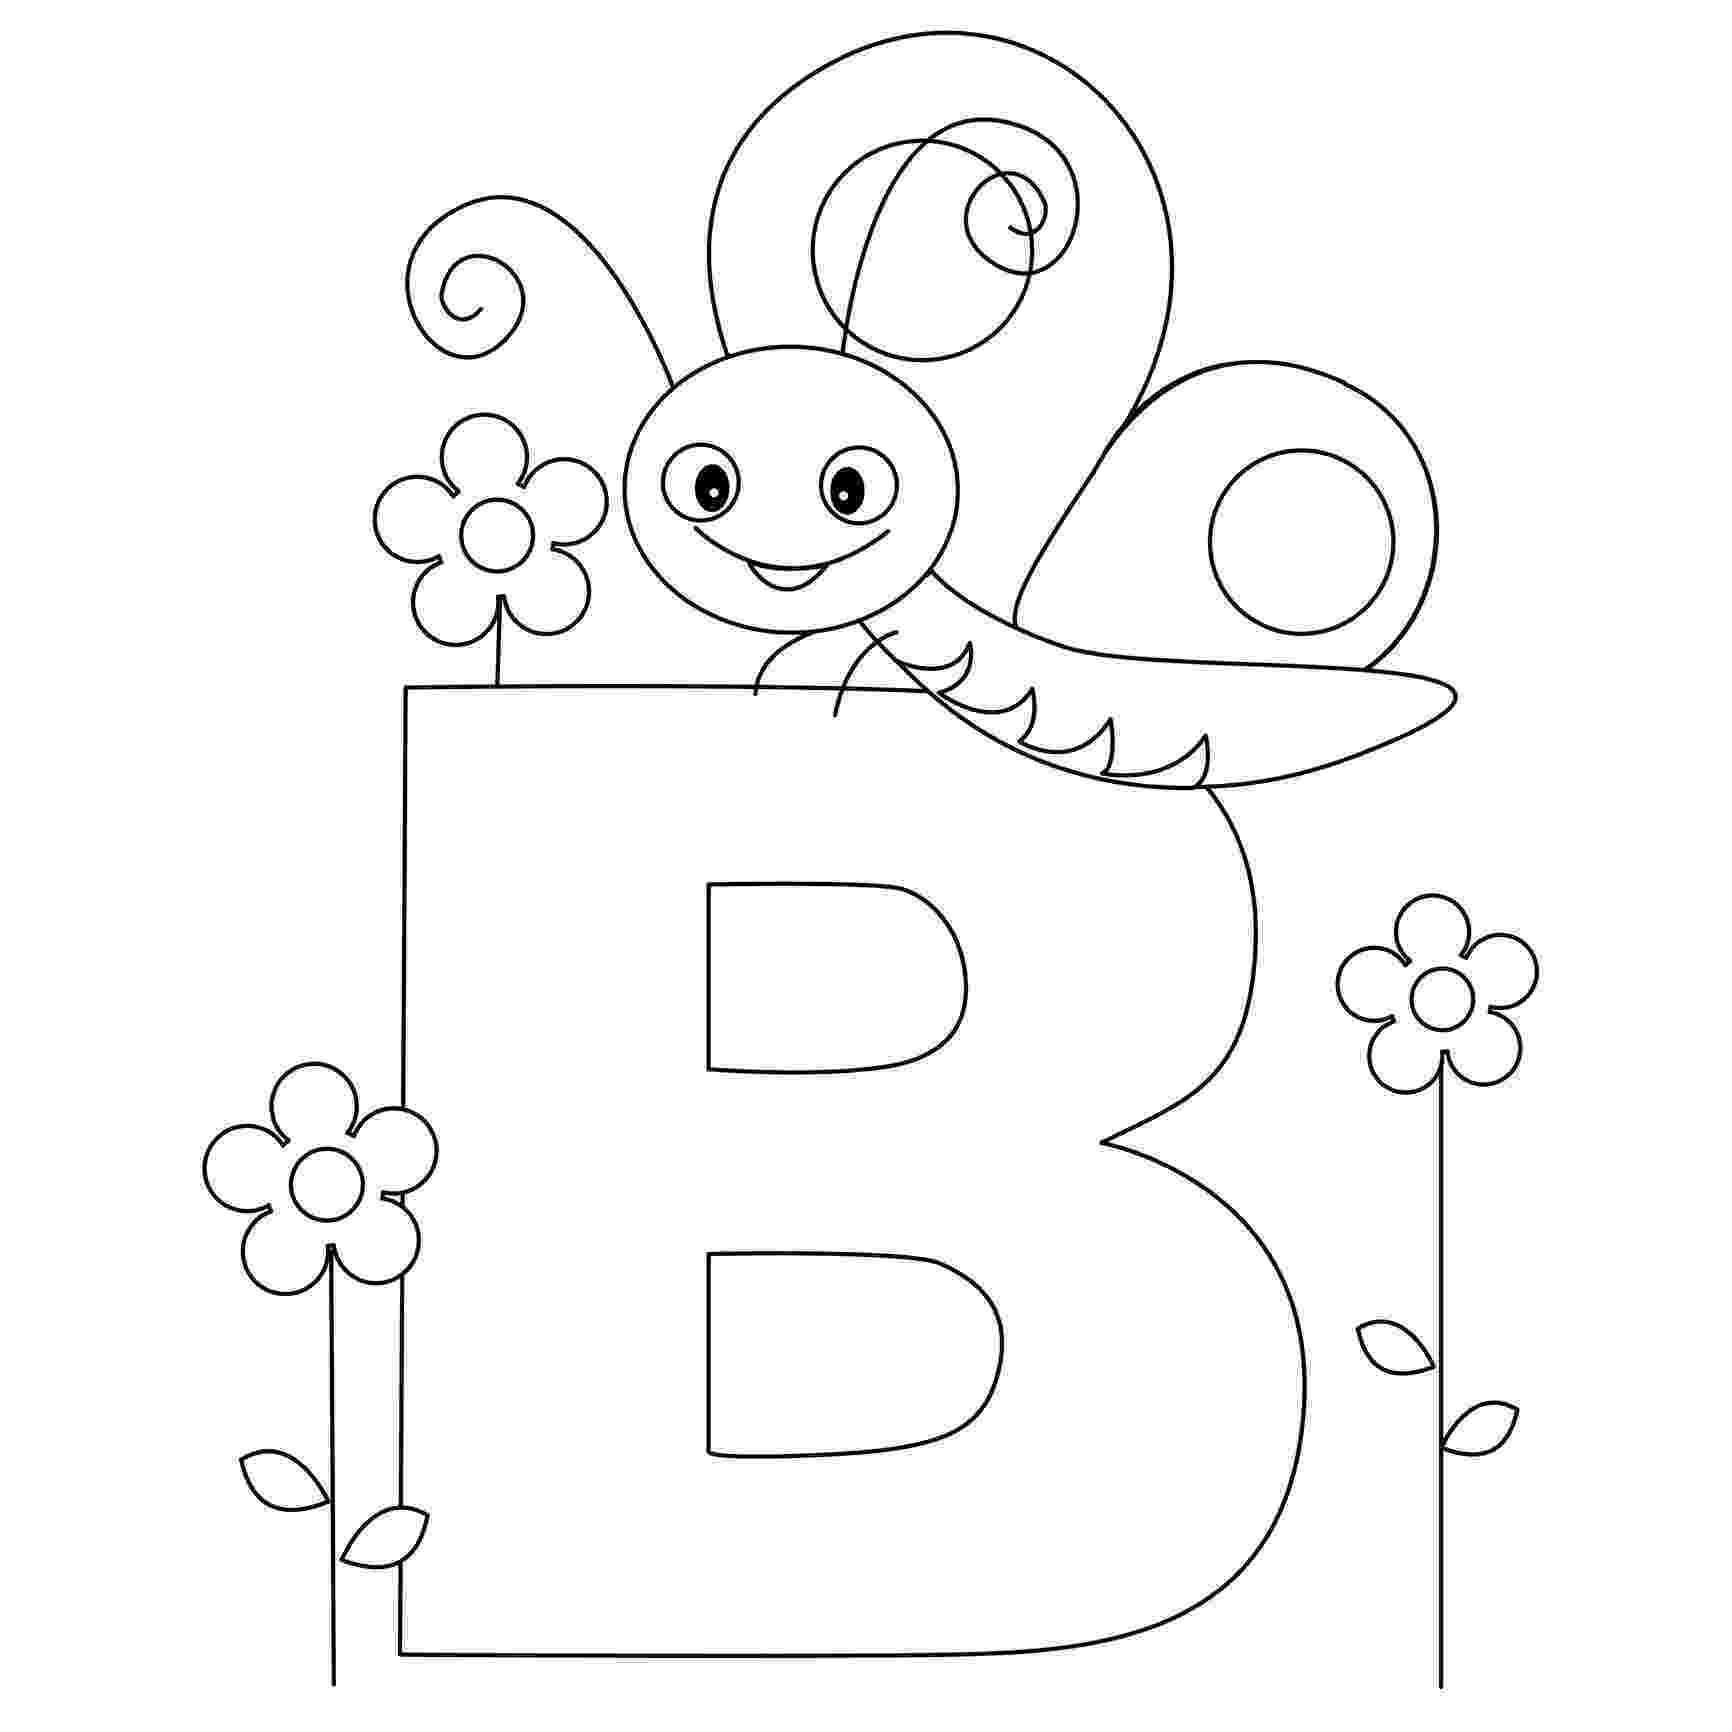 free printable coloring alphabet letters free printable alphabet coloring pages for kids best coloring letters alphabet free printable 